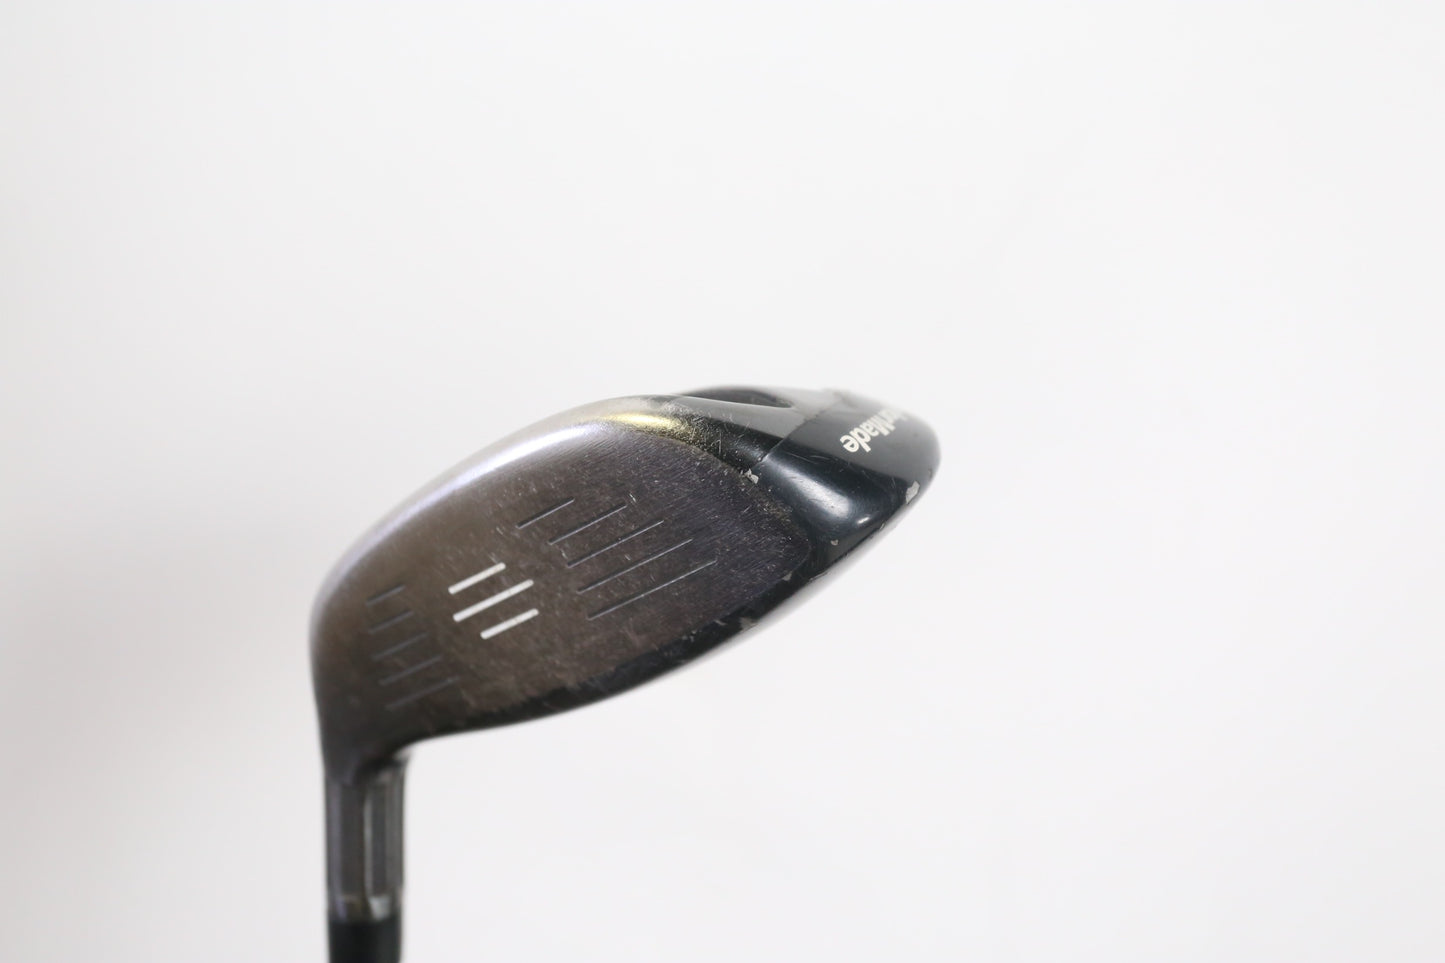 Used TaylorMade M2 4H Hybrid - Right-Handed - 22 Degrees - Ladies Flex